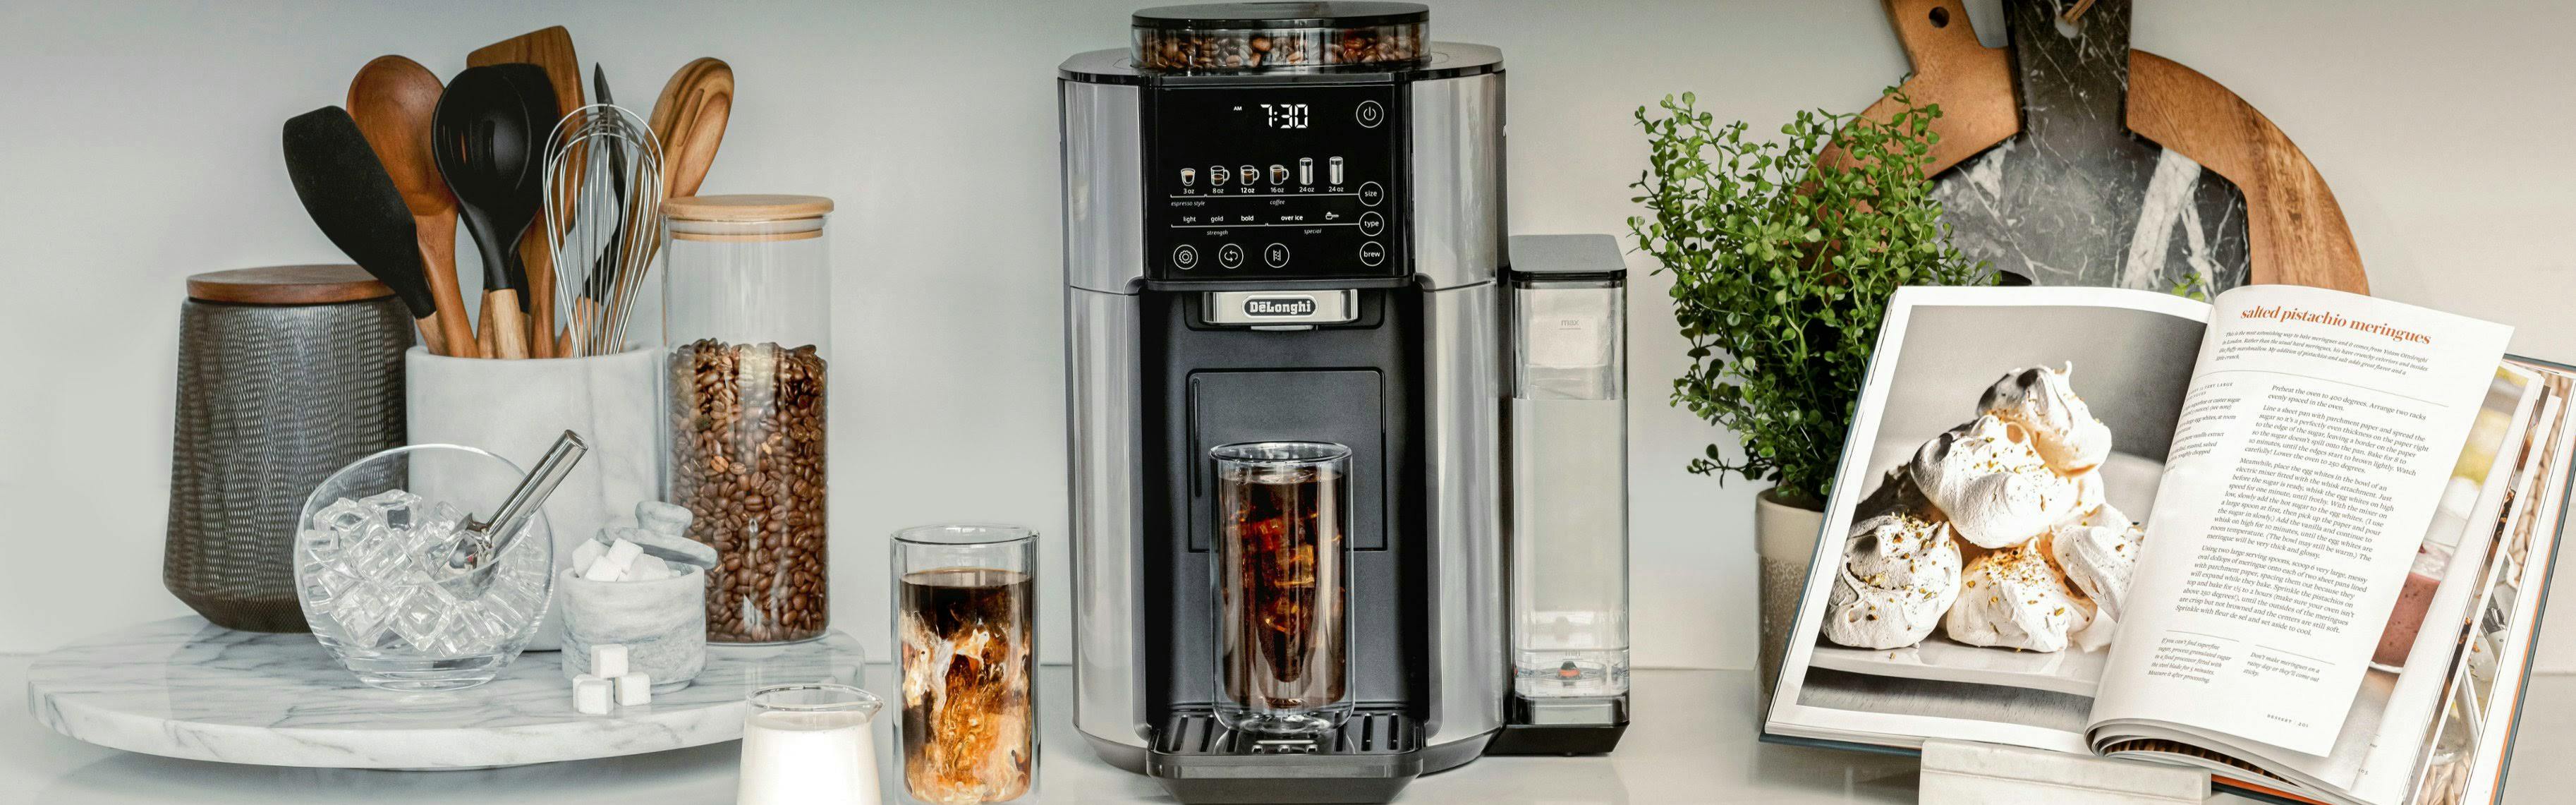 De'Longhi's new bean to cup coffee machine is a must for coffee